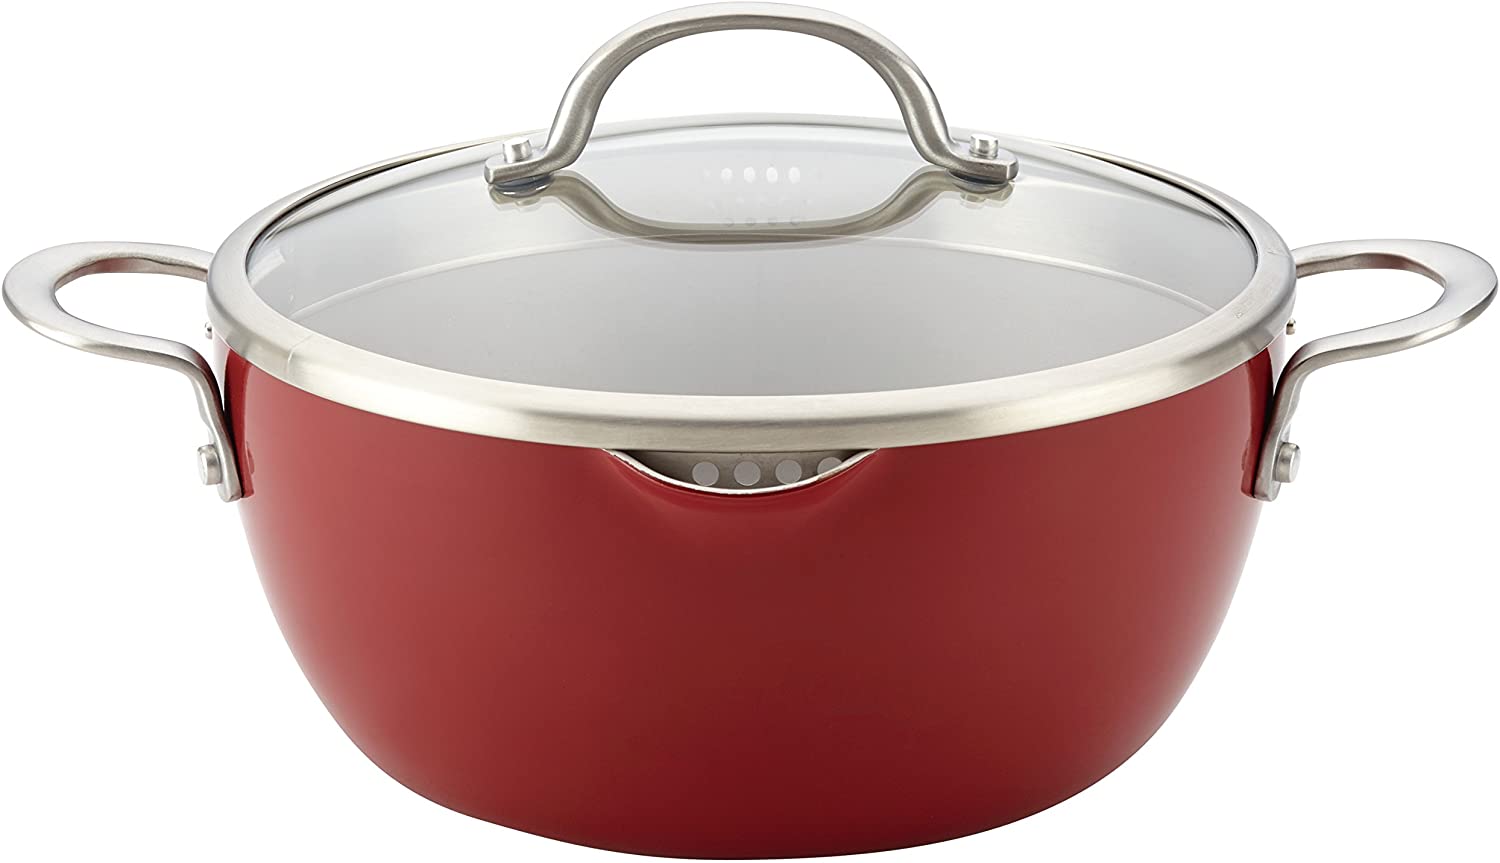 Ayesha Curry 5.5-Quart Home Collection Nonstick Casserole Dish